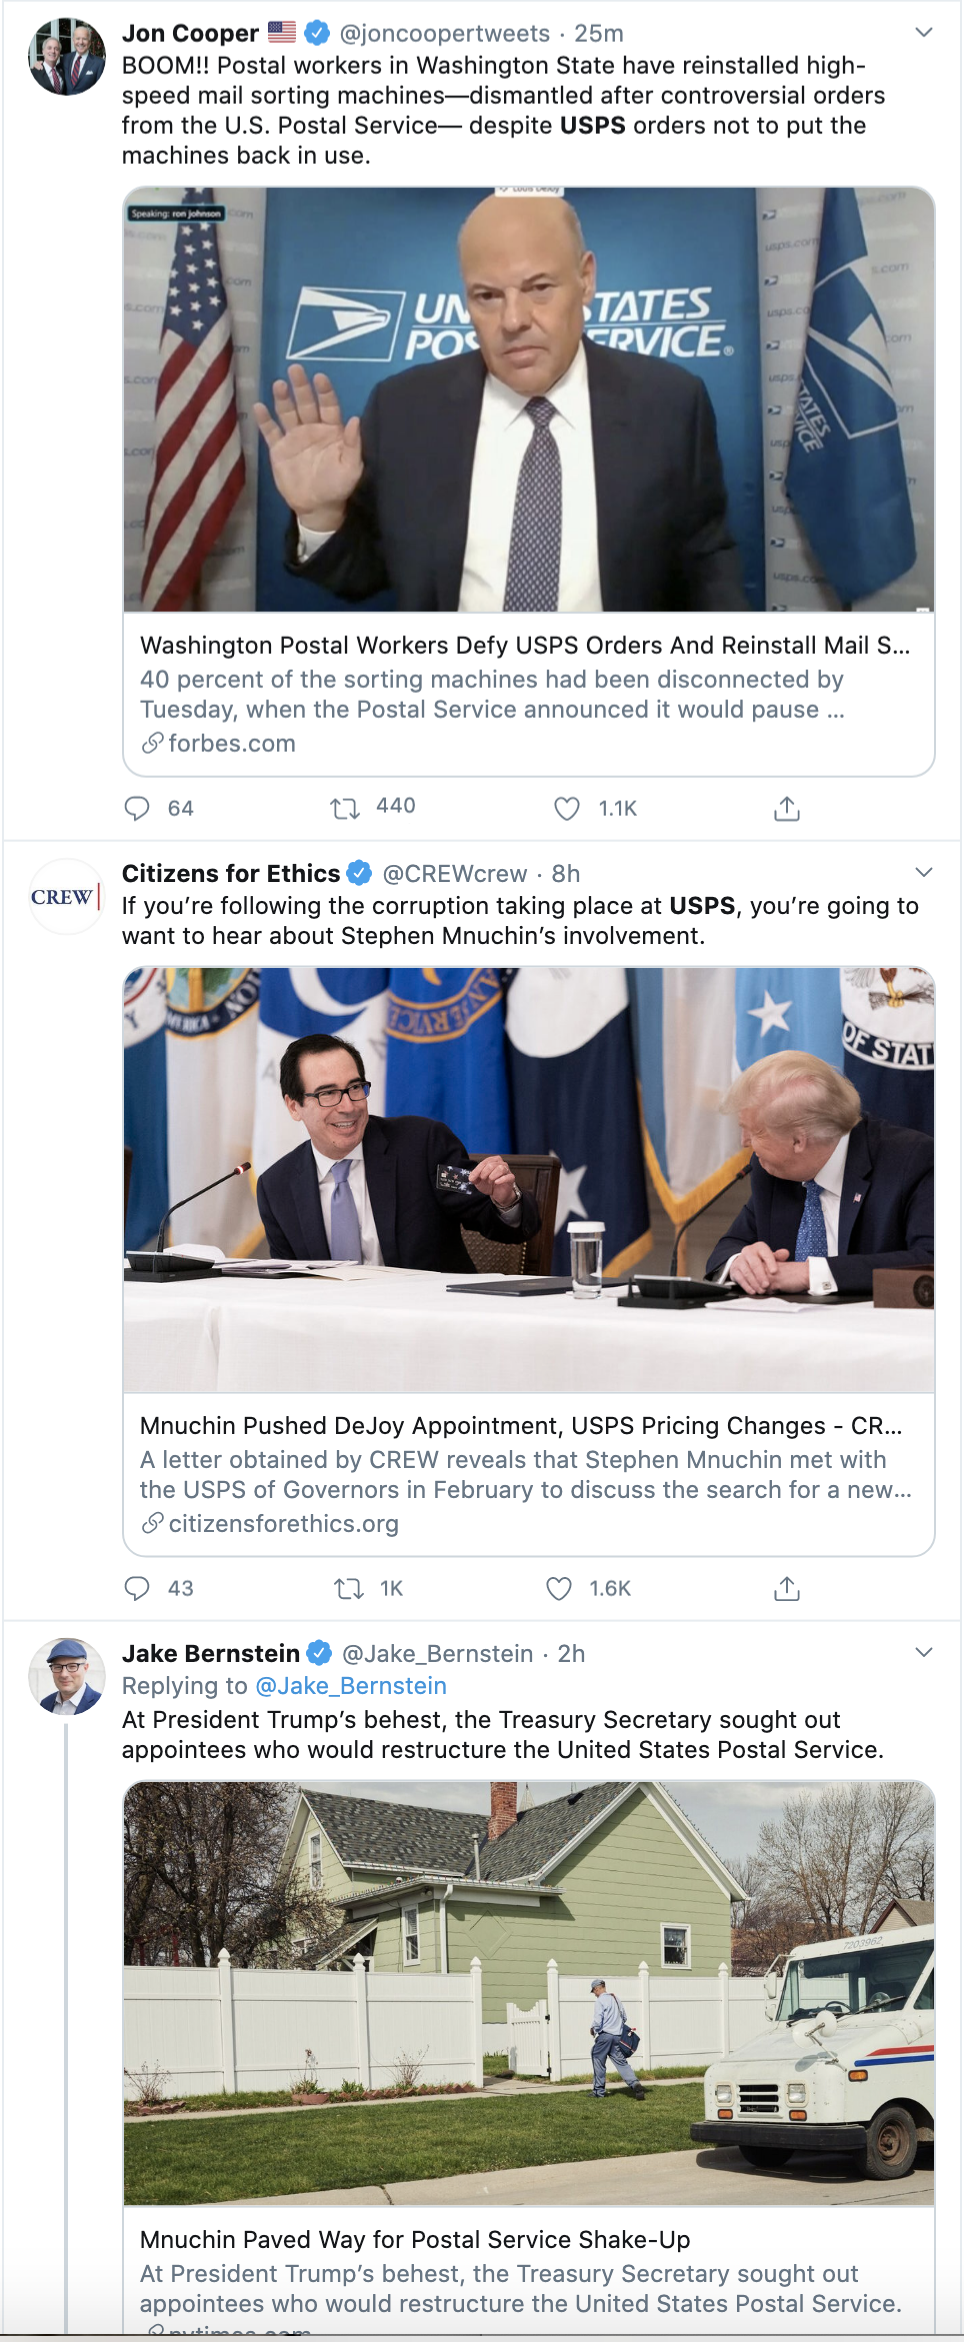 Screen-Shot-2020-08-23-at-8.50.14-AM USPS Employees Defect & Publicly Defy Trump Orders Election 2020 Featured National Security Politics Top Stories 